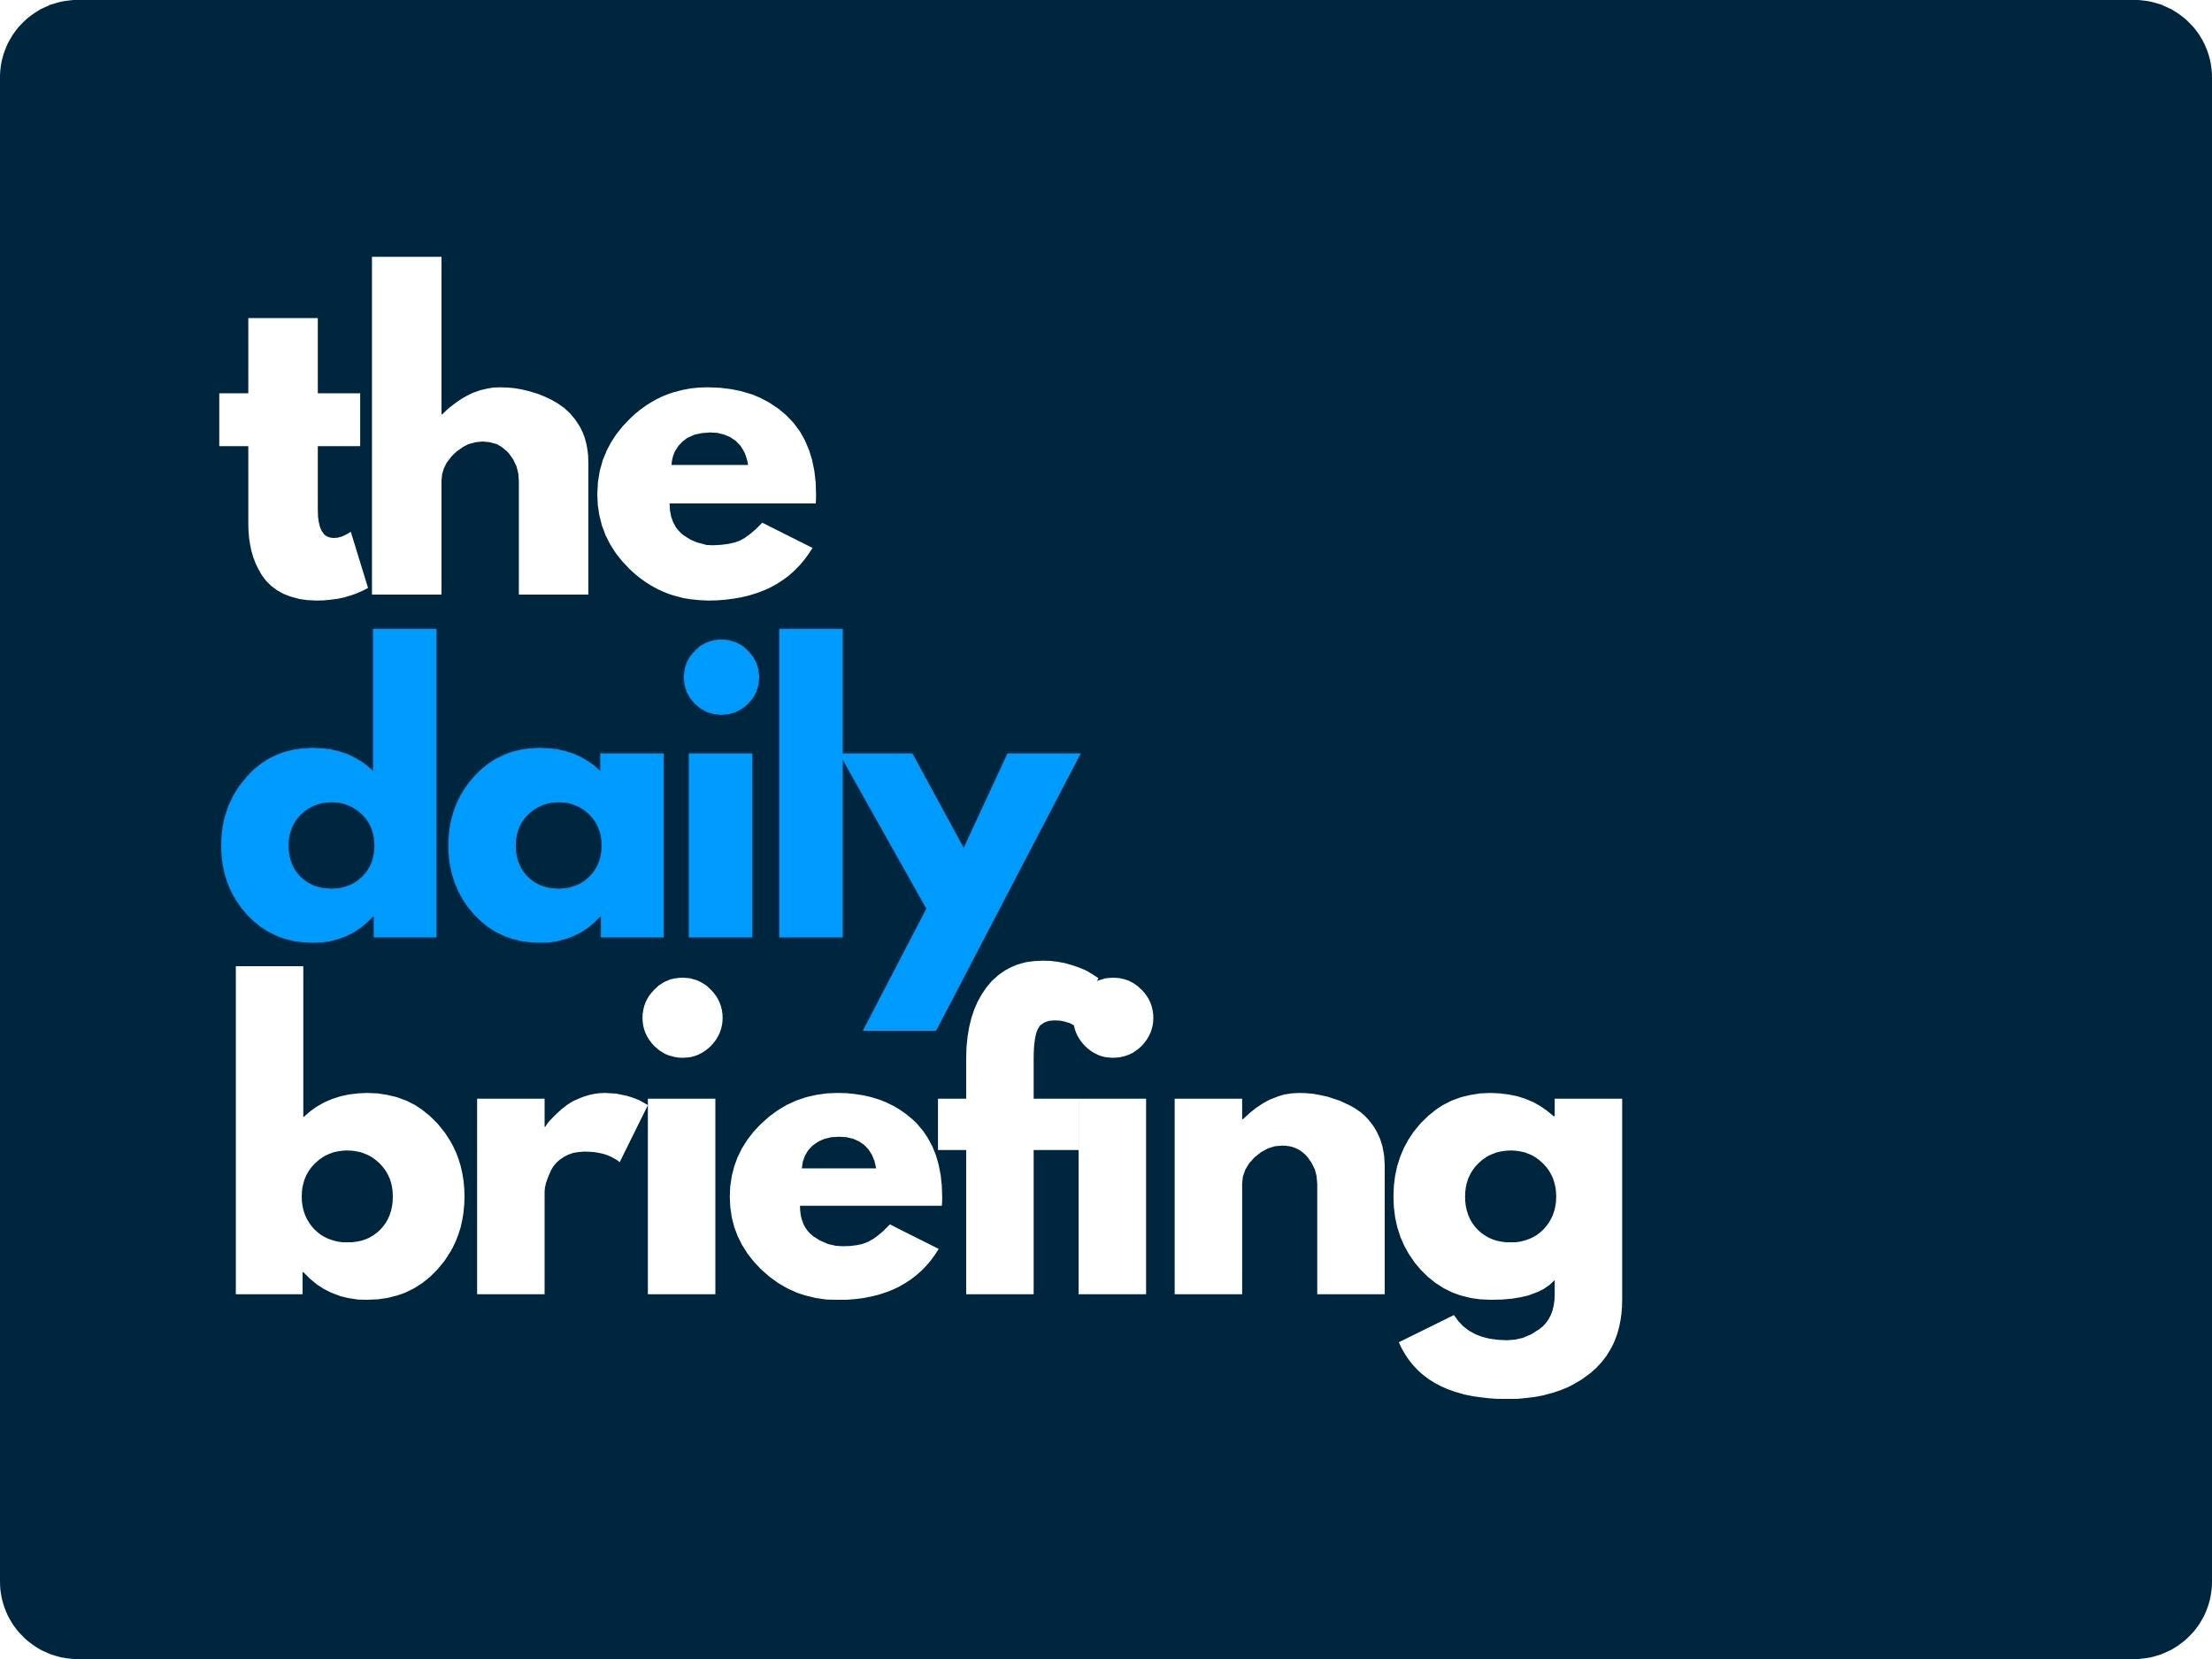 Hamilton County prosecutor launches integrity unit: Today's top stories | Daily Briefing